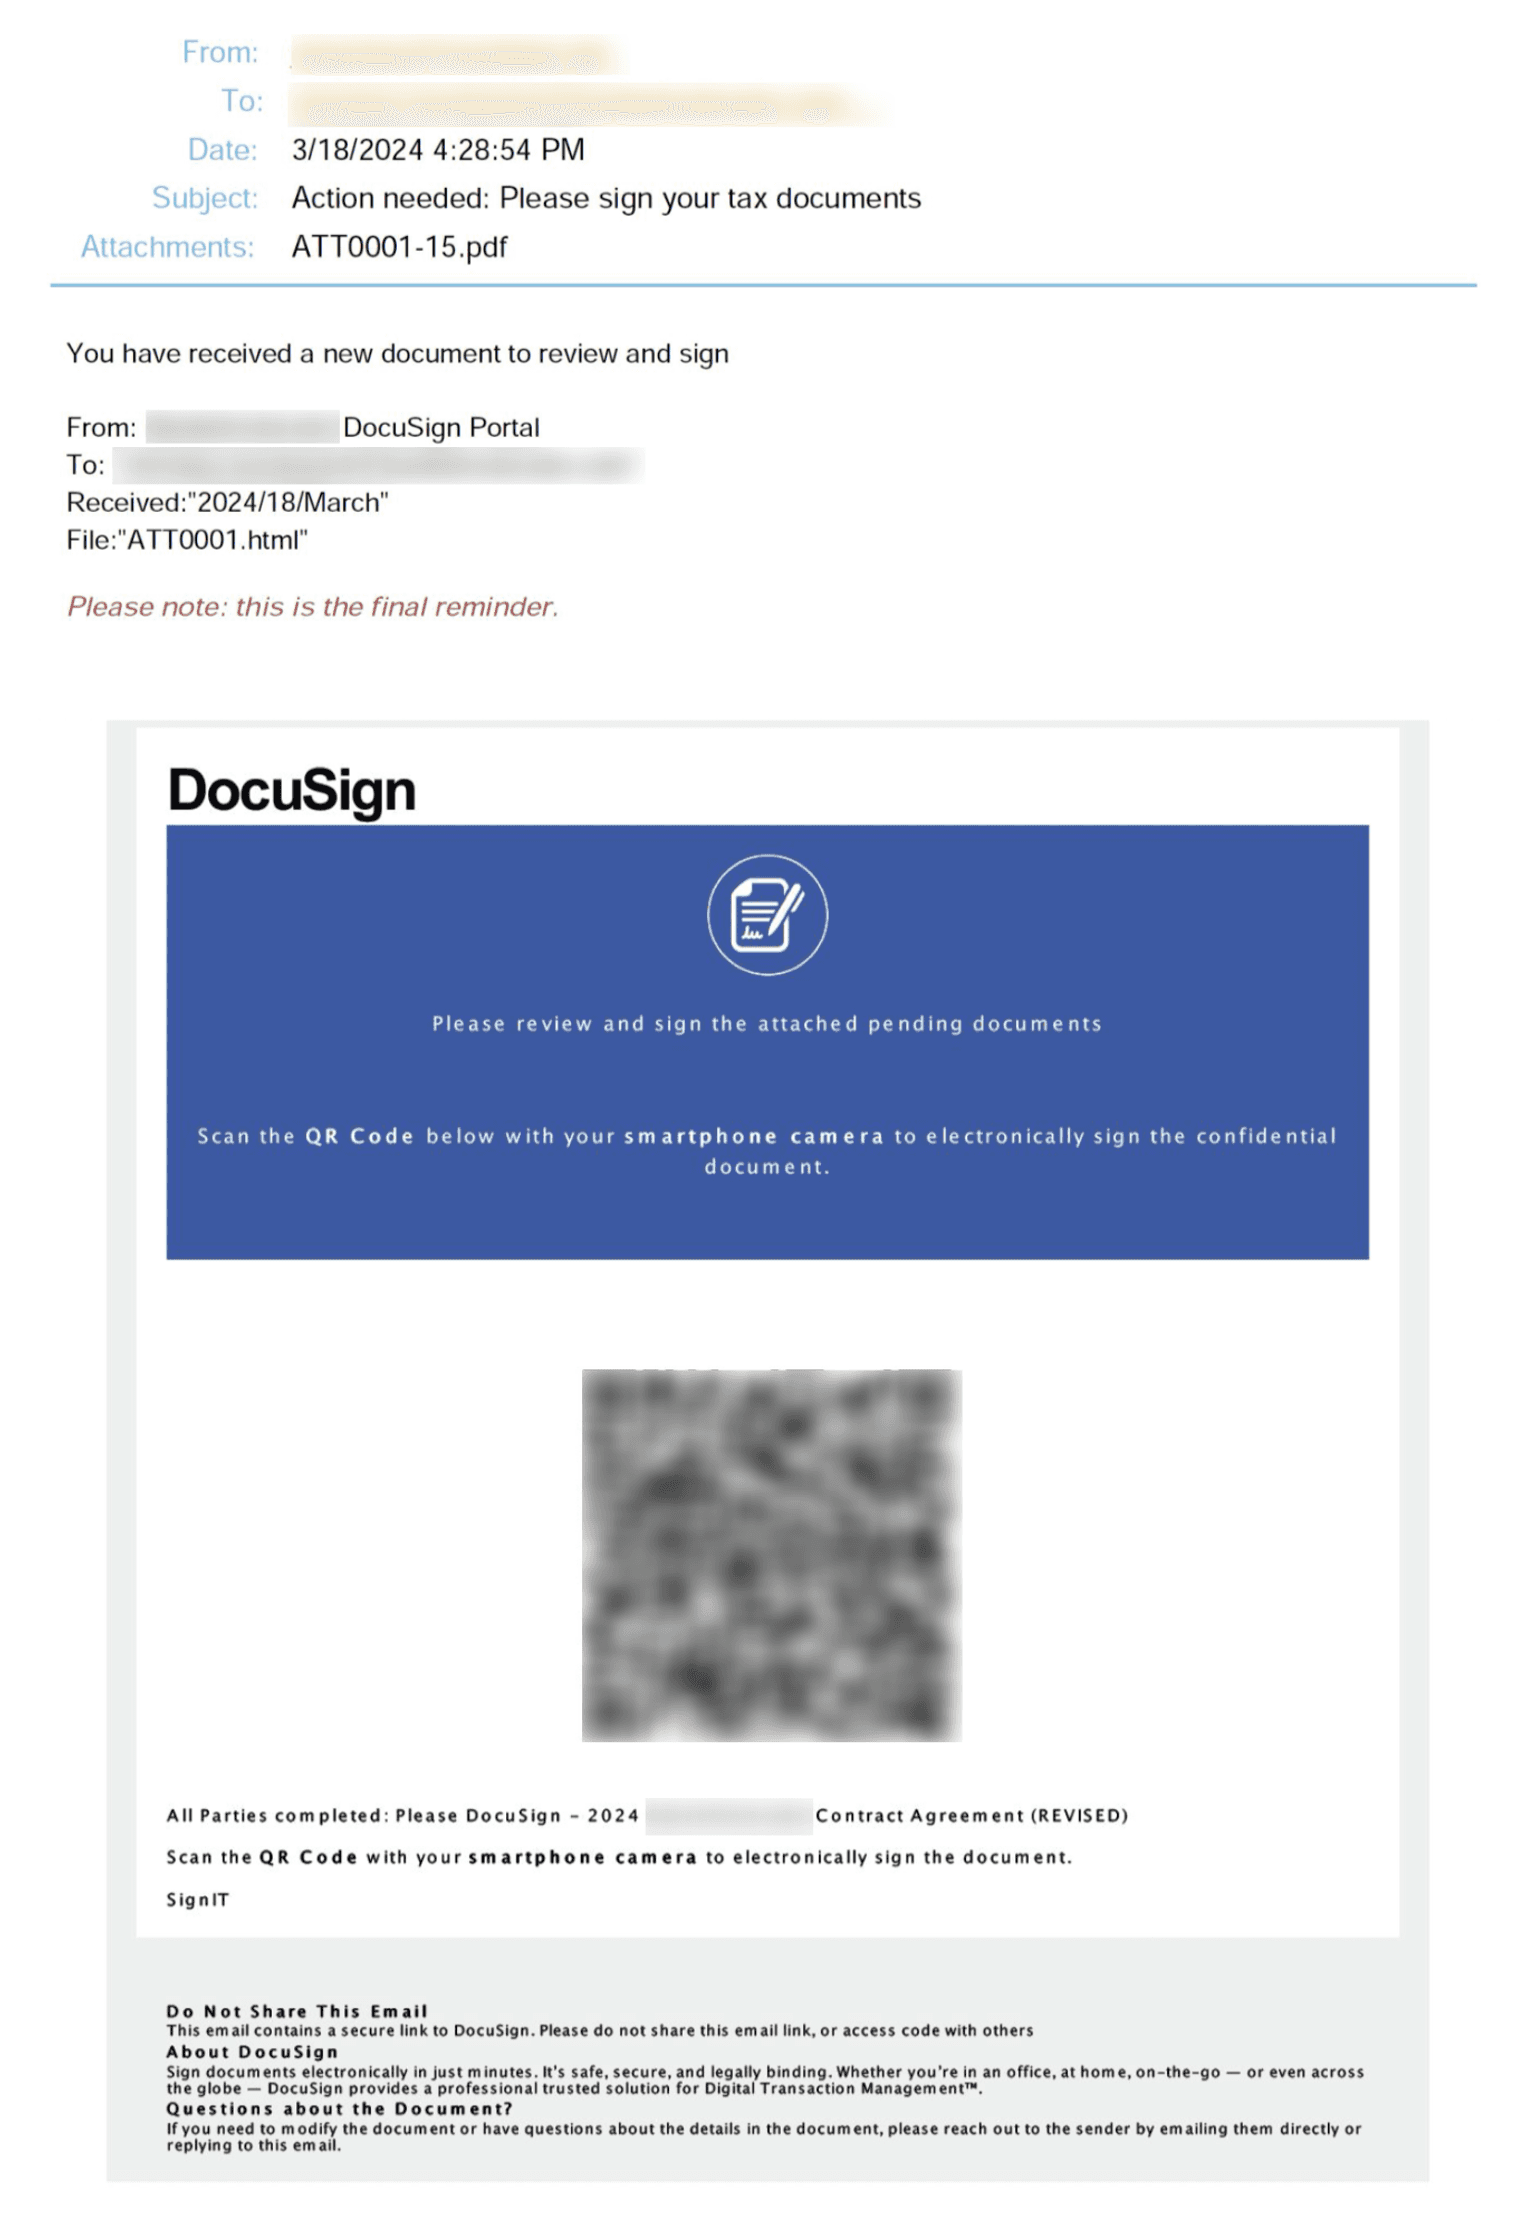 Tax Themed Email Scams Docu Sign QR Code